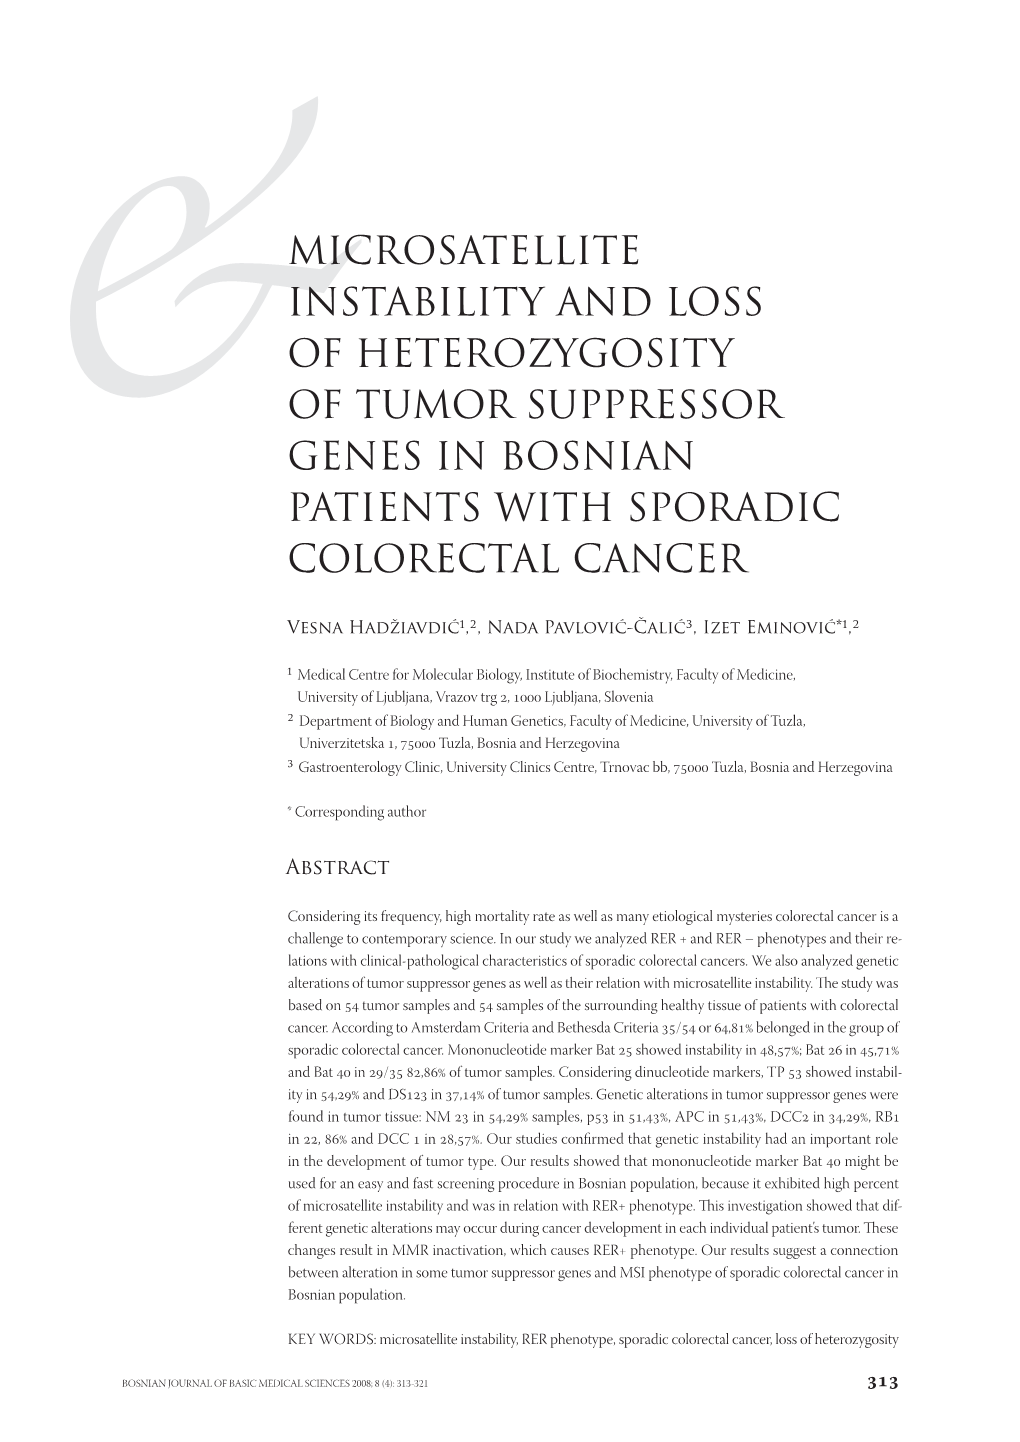 Microsatellite Instability and Loss of Heterozygosity of Tumor Suppressor &Genes in Bosnian Patients with Sporadic Colorectal Cancer